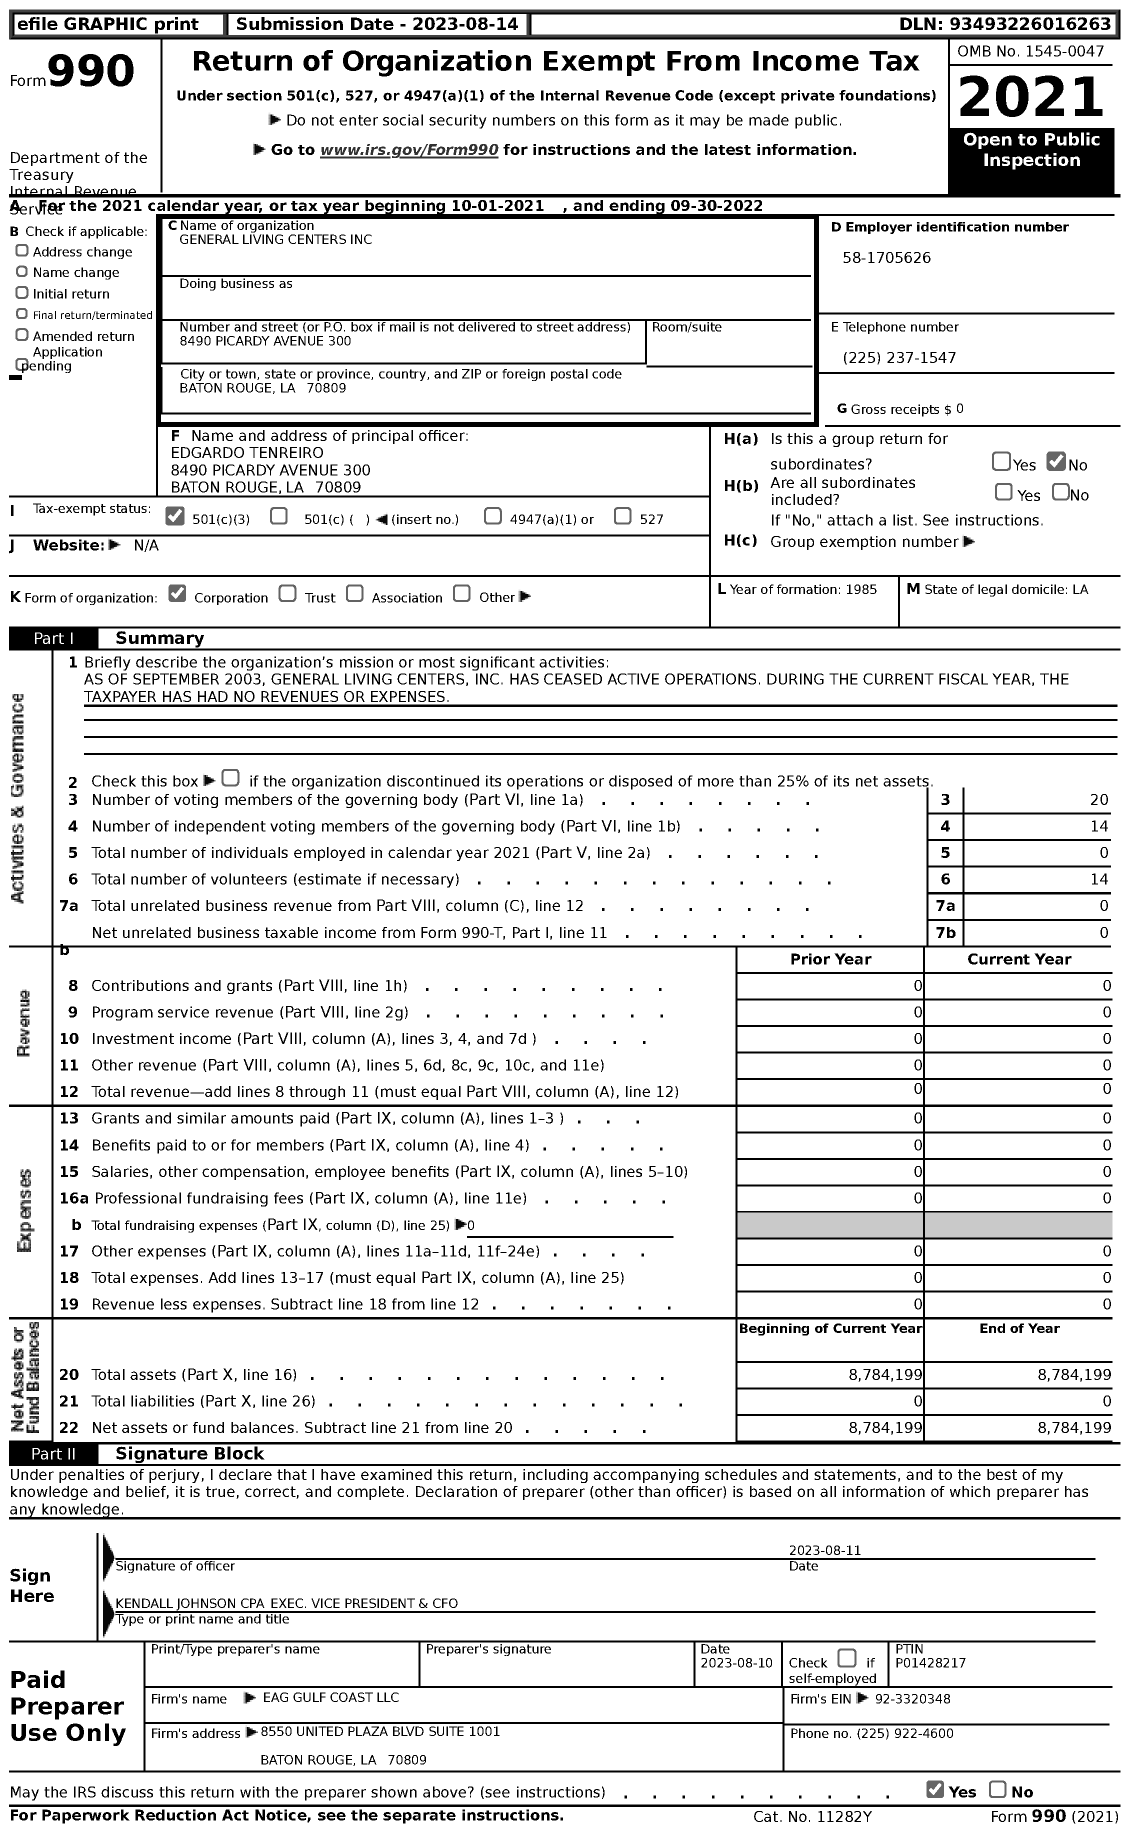 Image of first page of 2021 Form 990 for General Living Centers